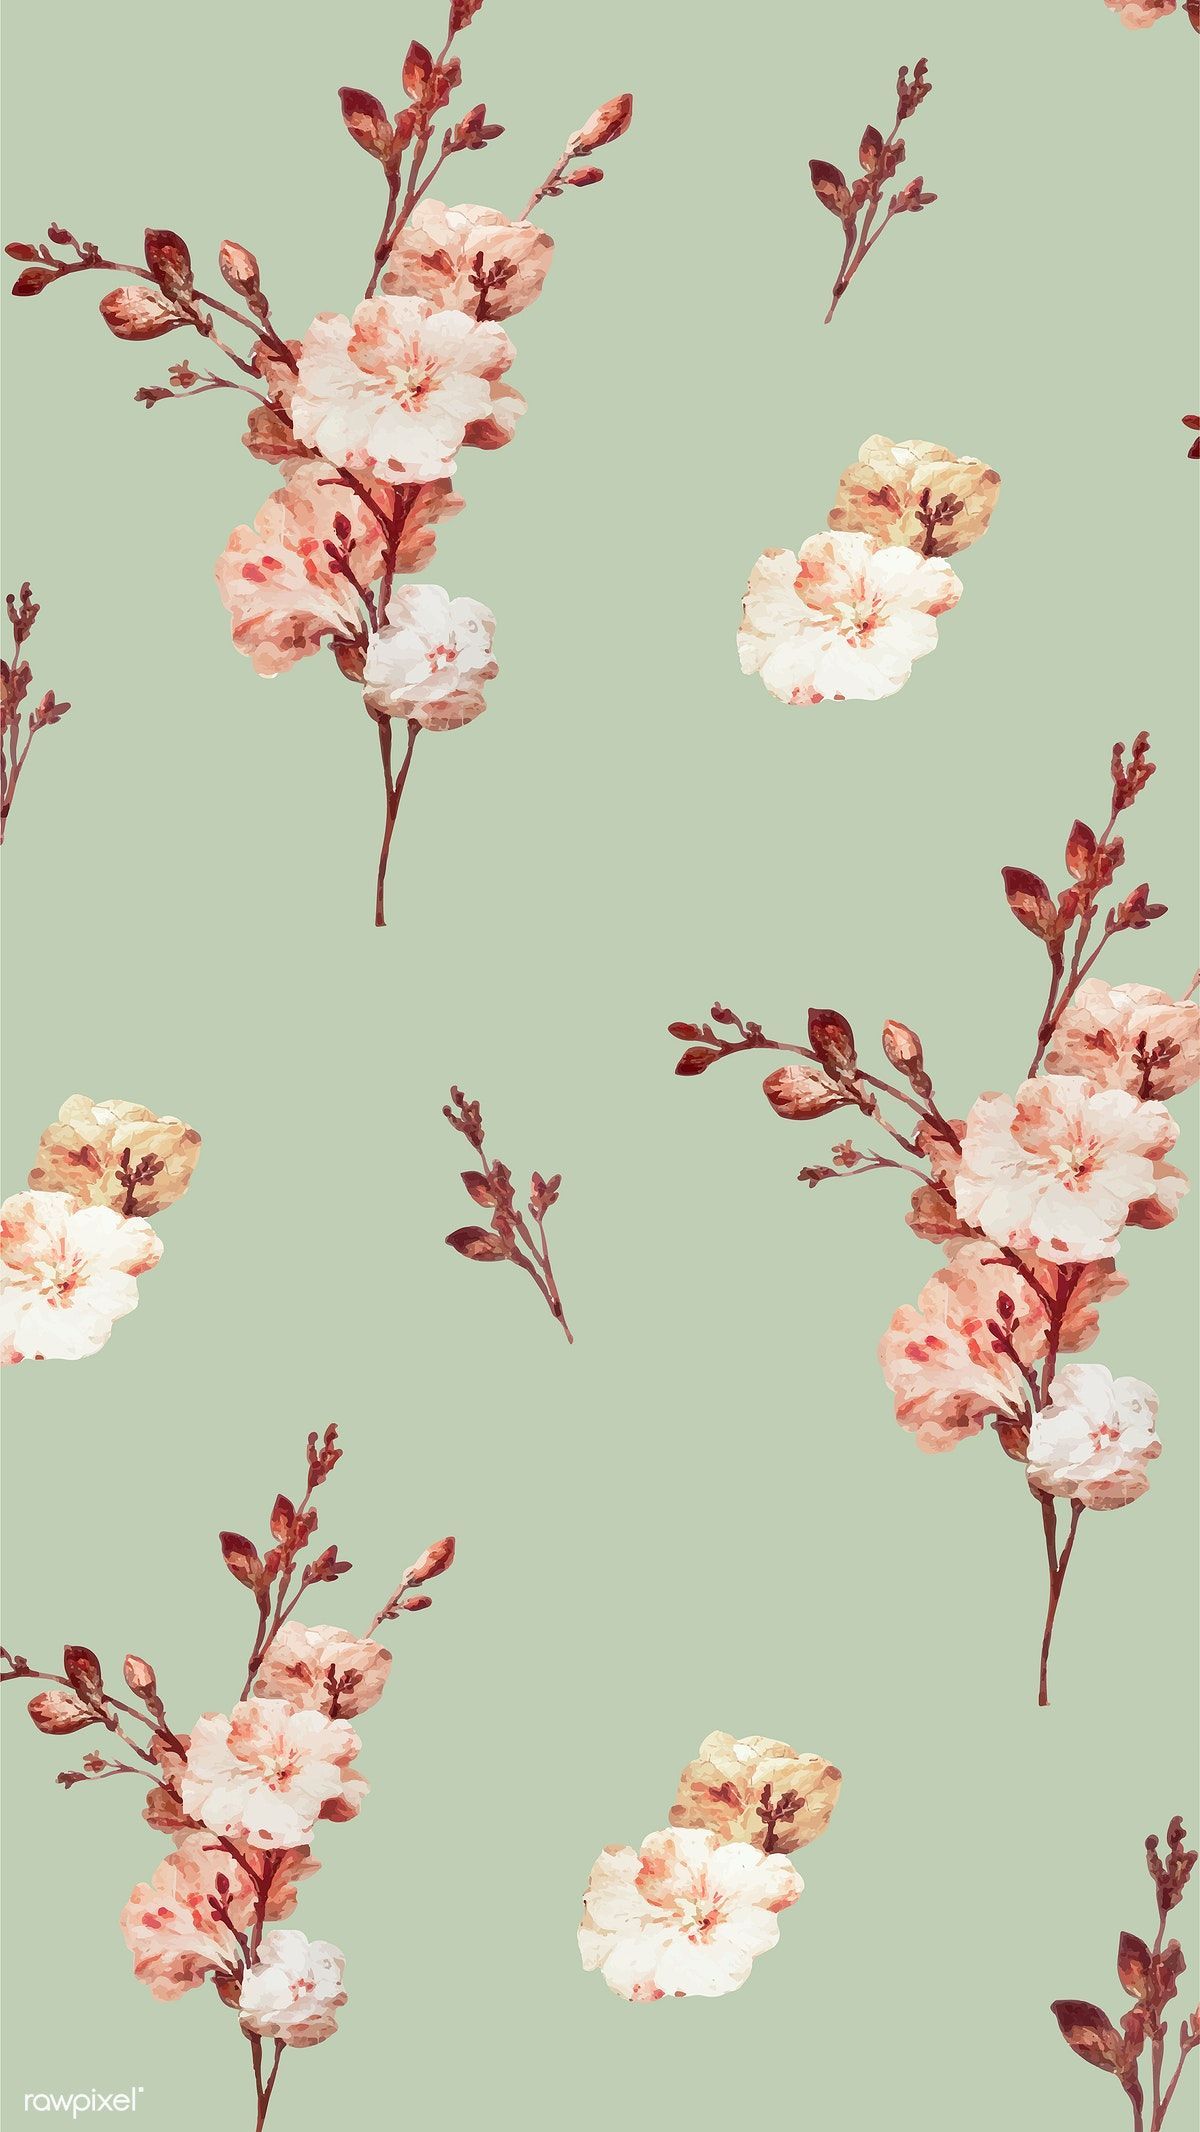 Download premium vector of Vintage floral background illustration vector - Download premium vector of Vintage floral background illustration vector -   16 beauty Background creative ideas